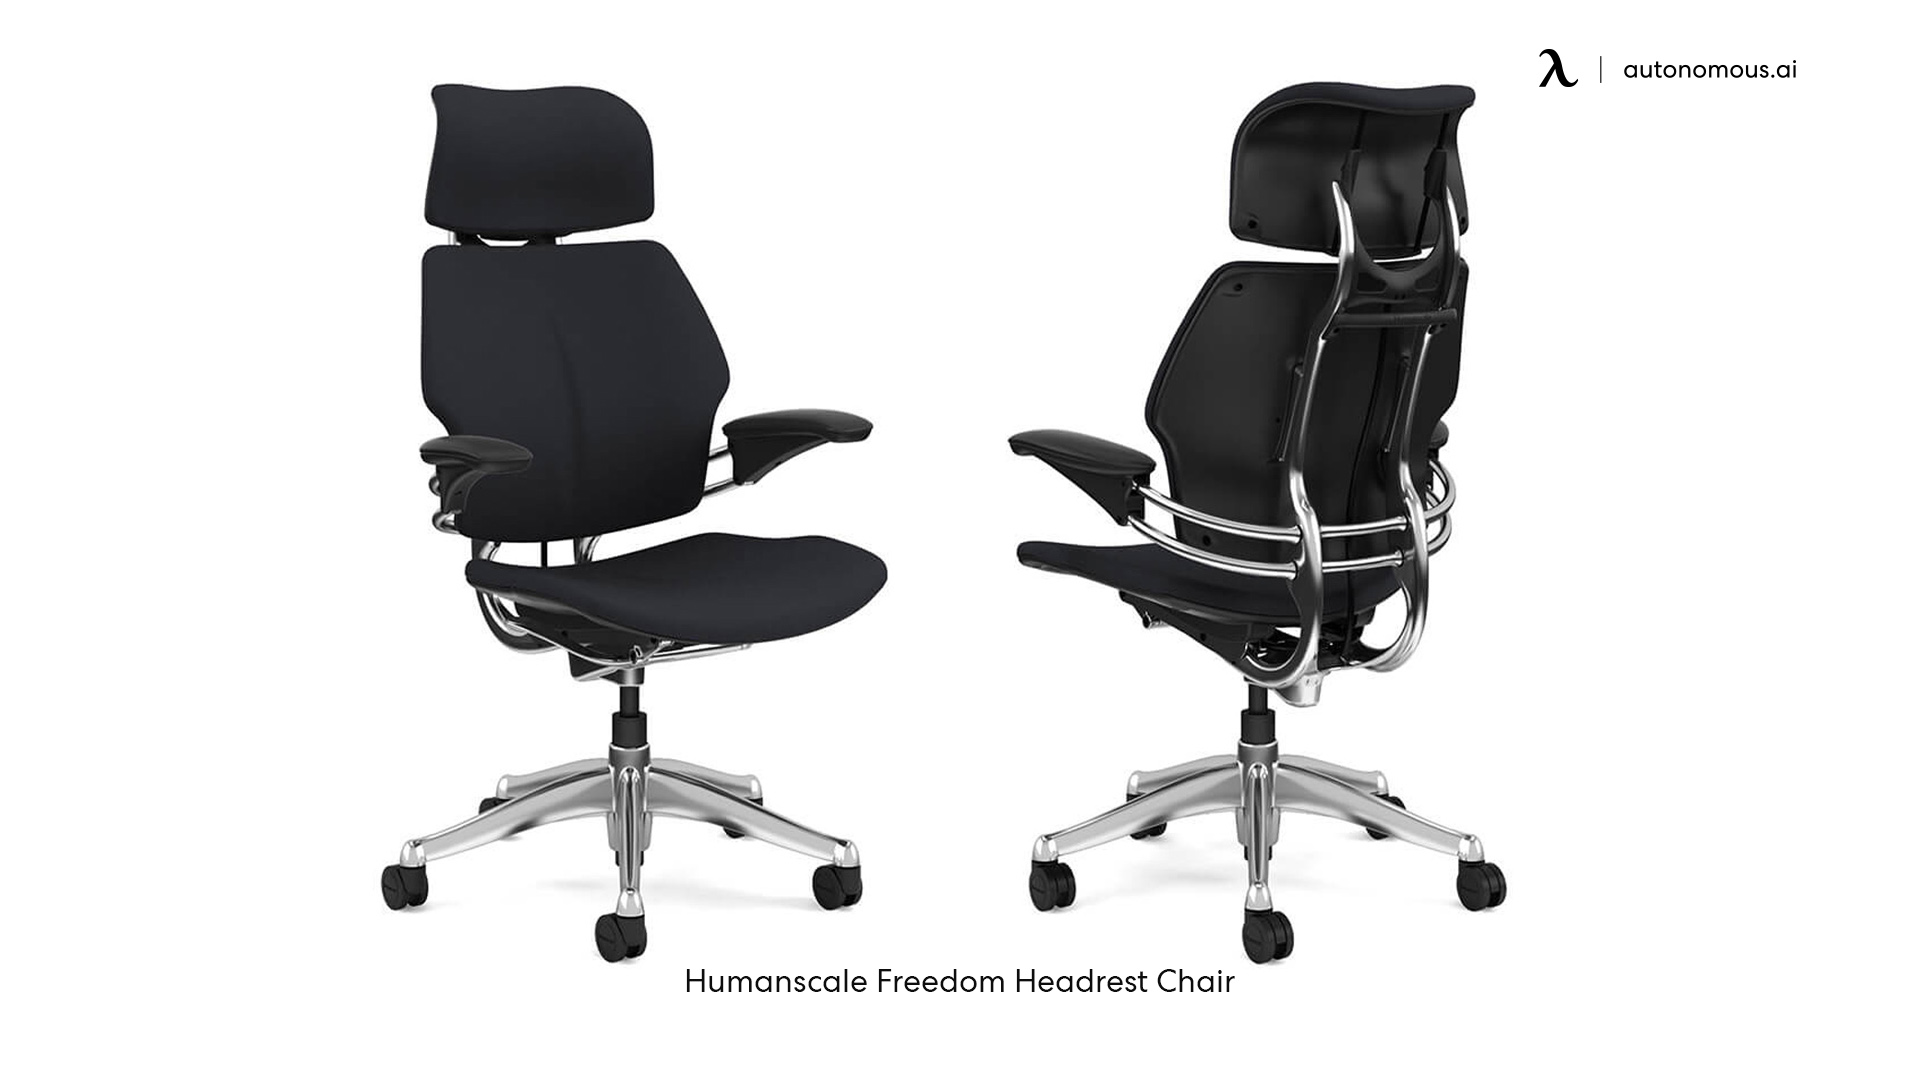 Humanscale Freedom small office chair with arms